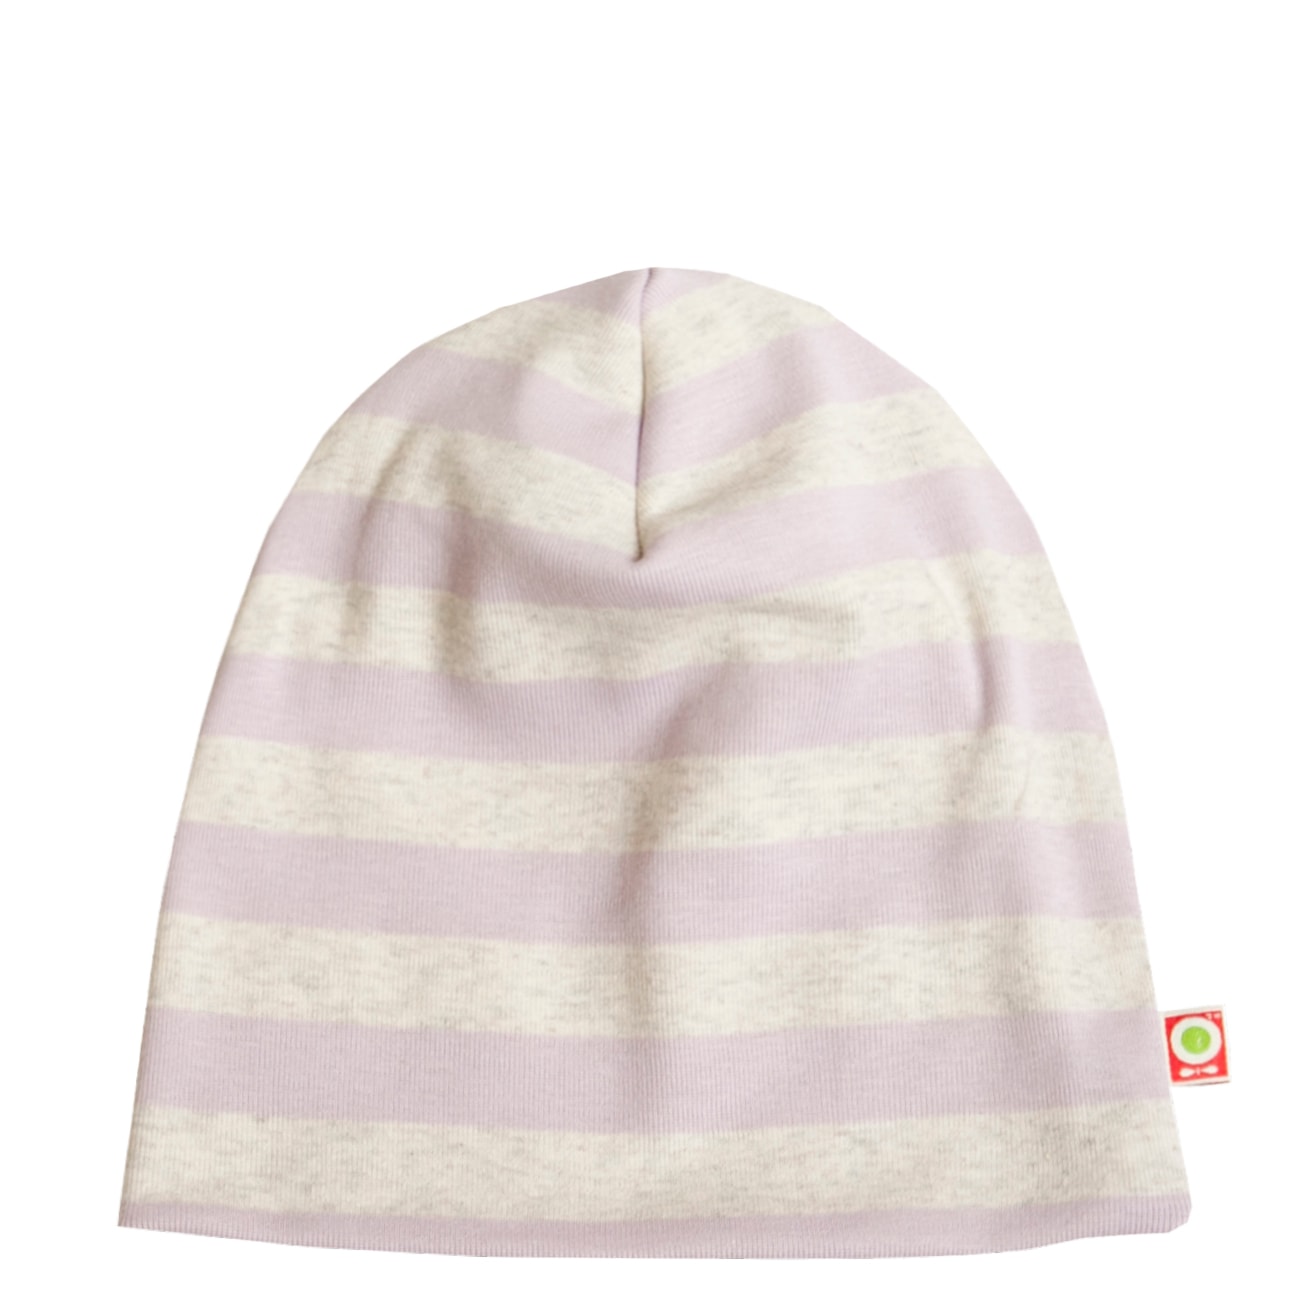 Beanie Hat,double layer -40%